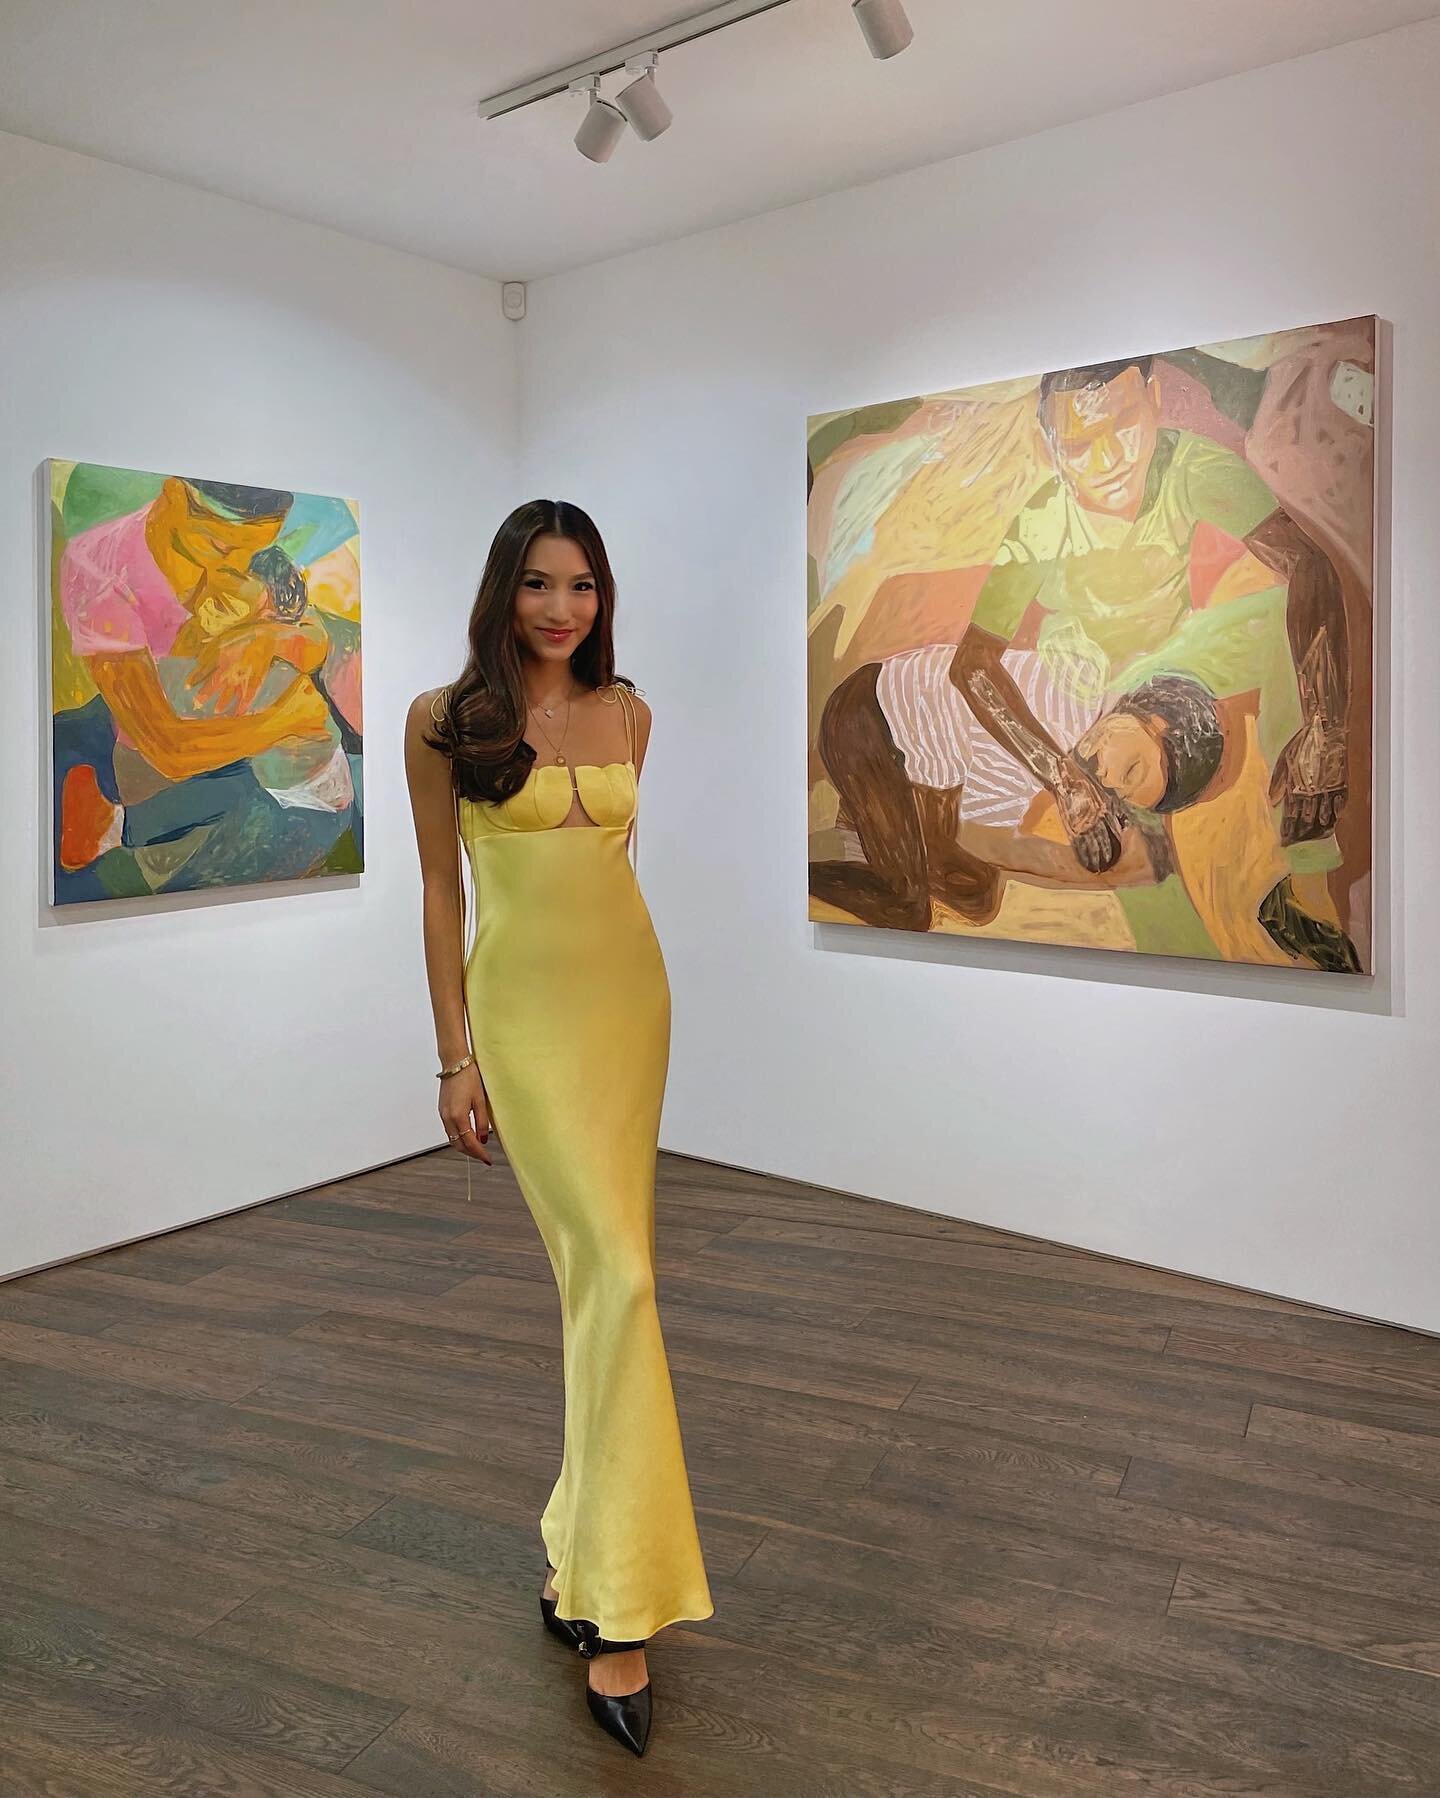 Thrilled to have curated &lsquo;Synthesis of Souls&rsquo; featuring @tiztaberhanu&rsquo;s beautiful new body of work at @addisfineart 💛 

Tizta Berhanu explores humanity&rsquo;s full spectrum of emotions in her figurative paintings. Narratives of lo